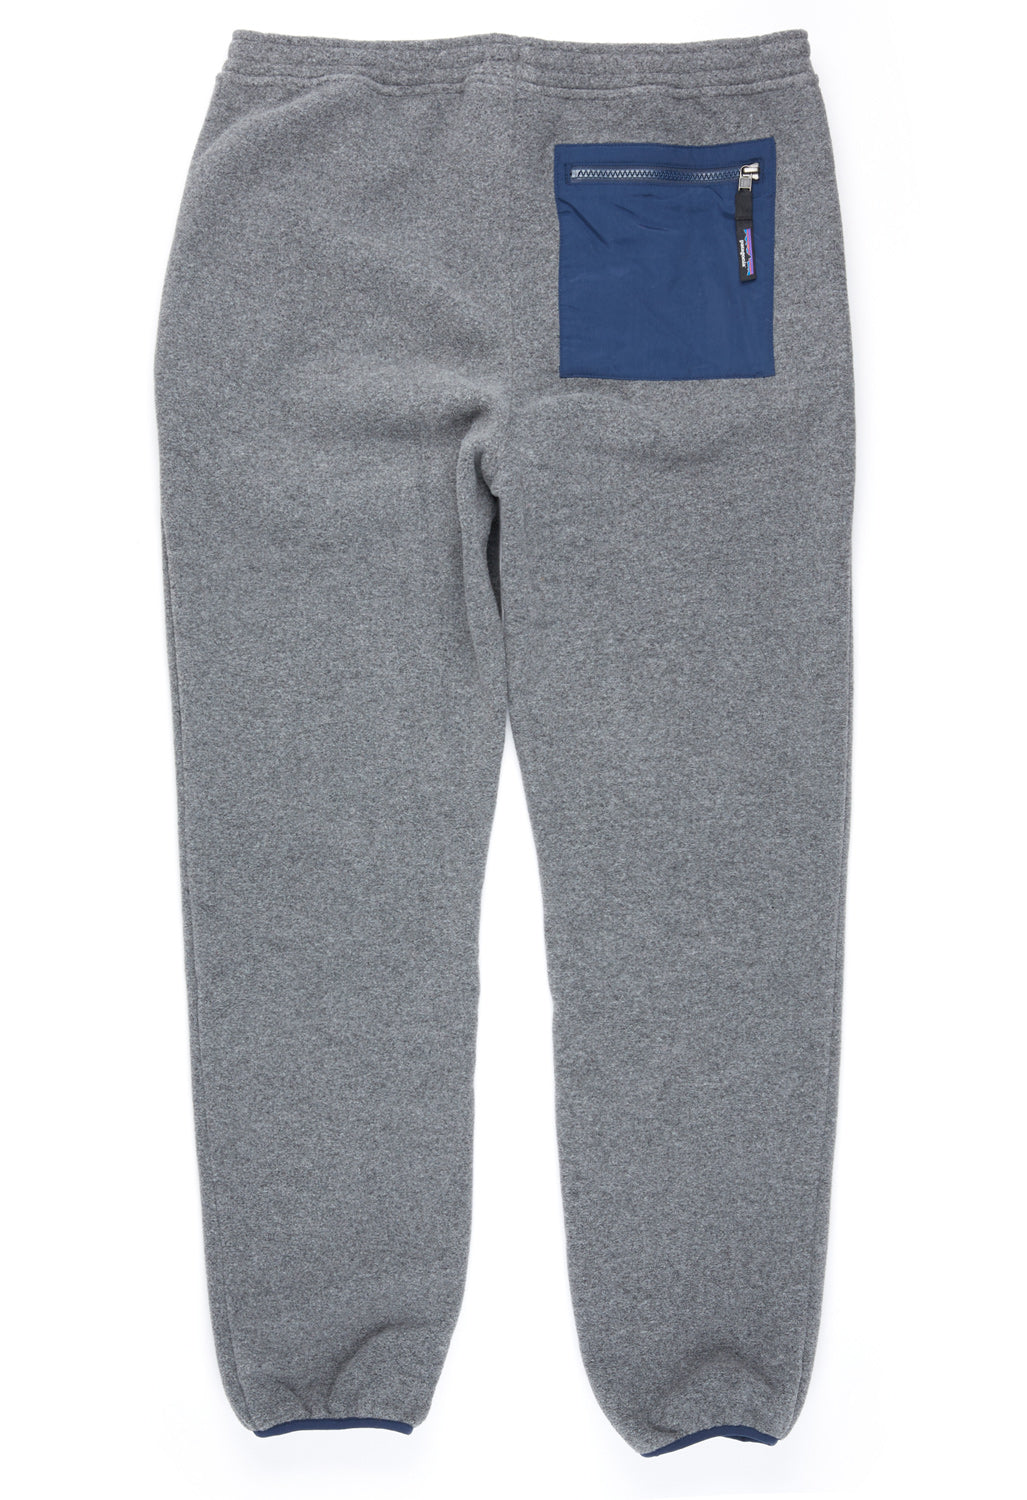 Patagonia Synch Pants - Nickle